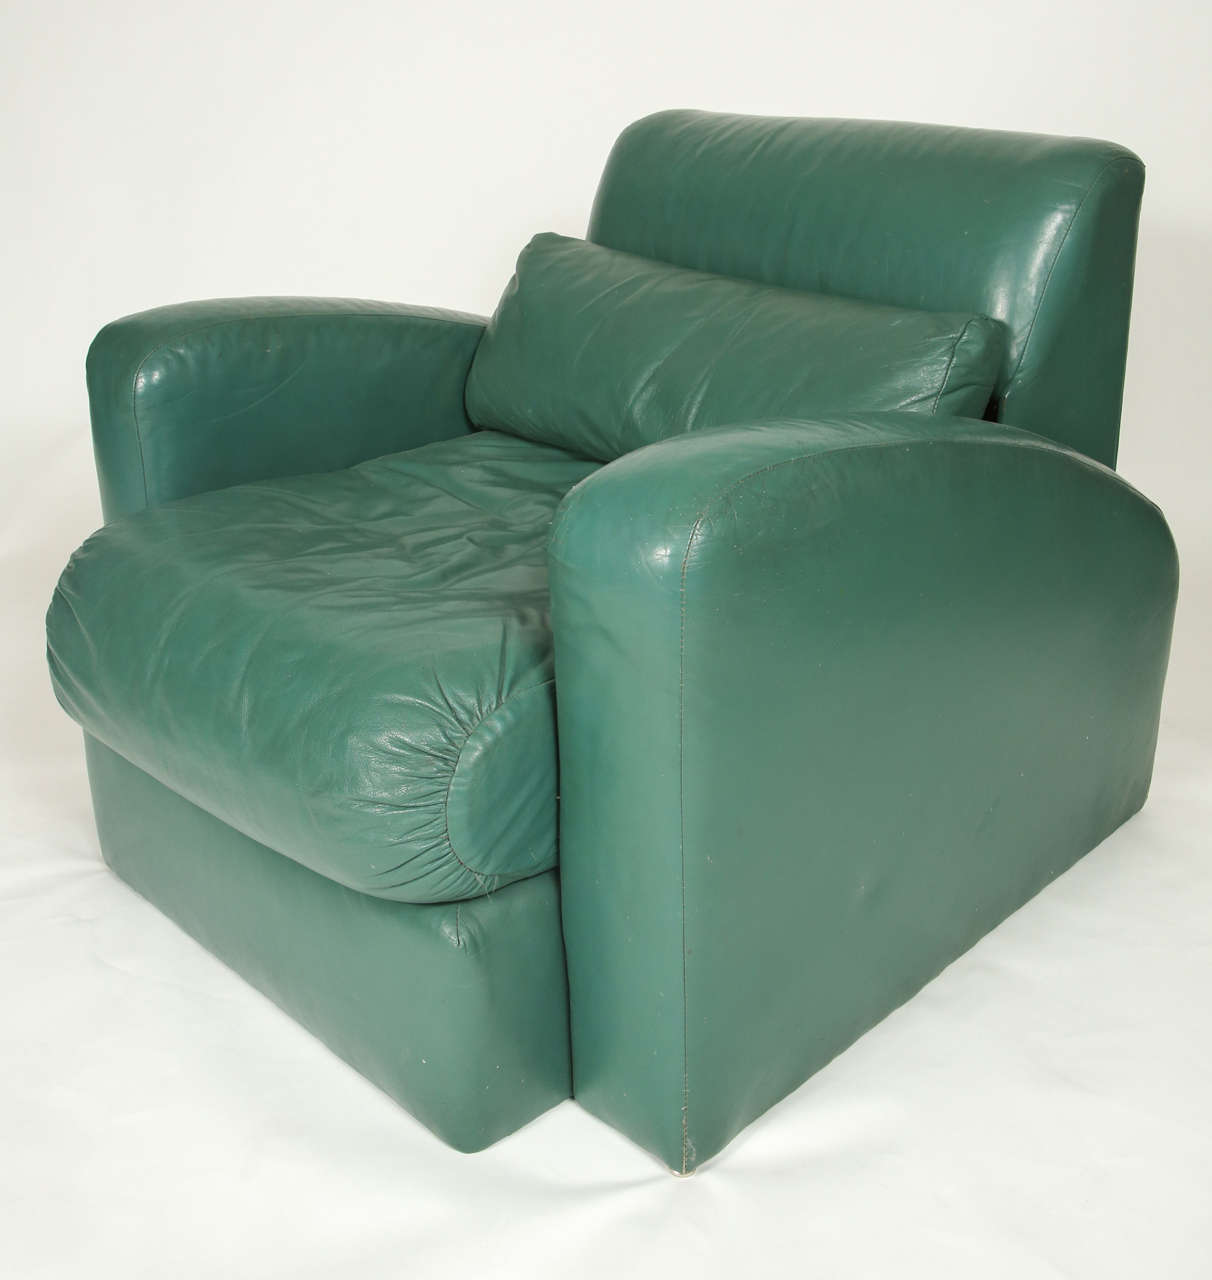 Leather Pair of Club chairs by Jay Spectre